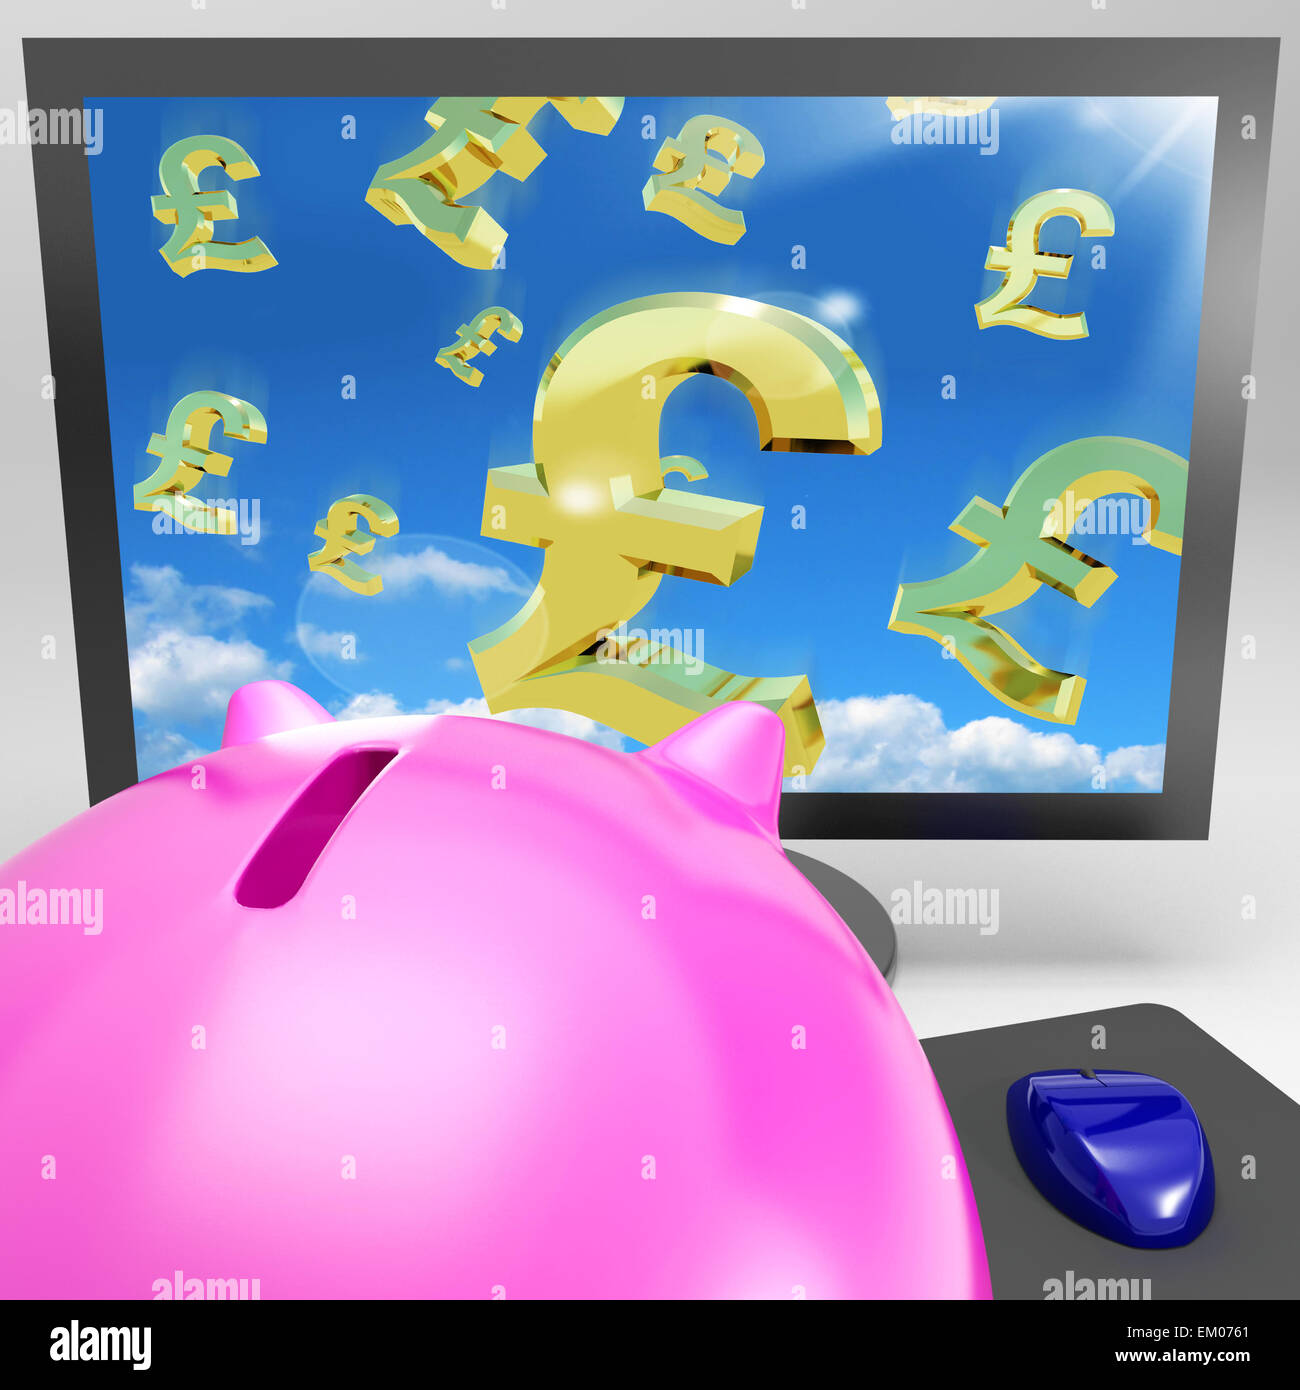 Pound Symbols Flying On Monitor Showing Britain Wealth Stock Photo